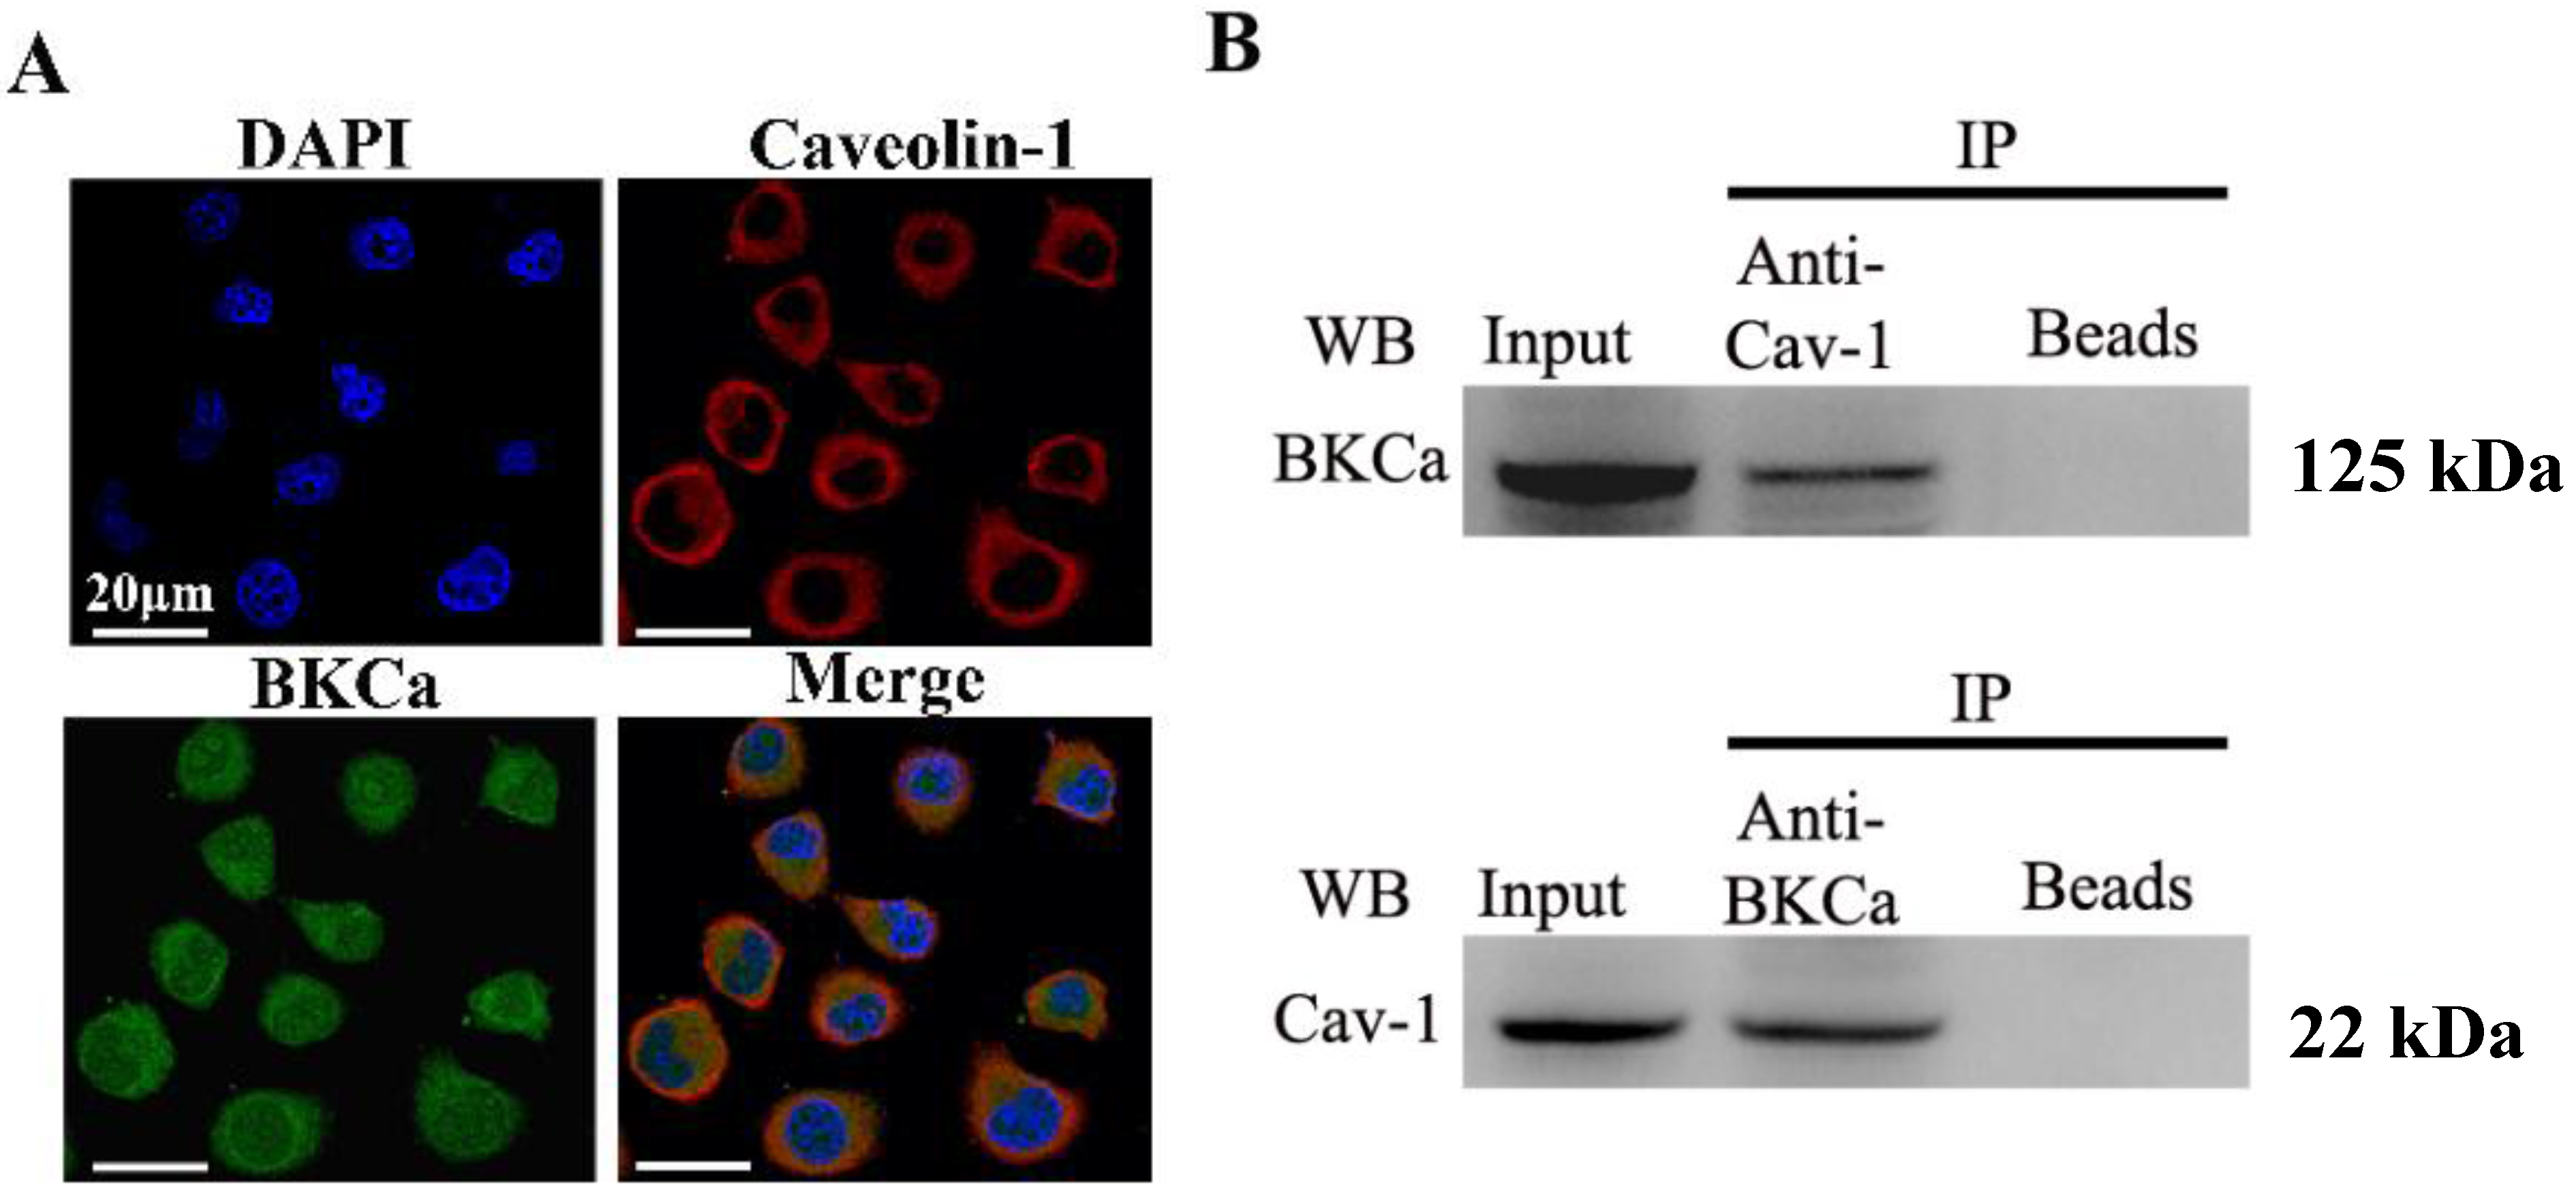 Caveolin-1 Limits the Contribution of BKCa Channel to MCF-7 Breast Cancer Cell Proliferation and Invasion